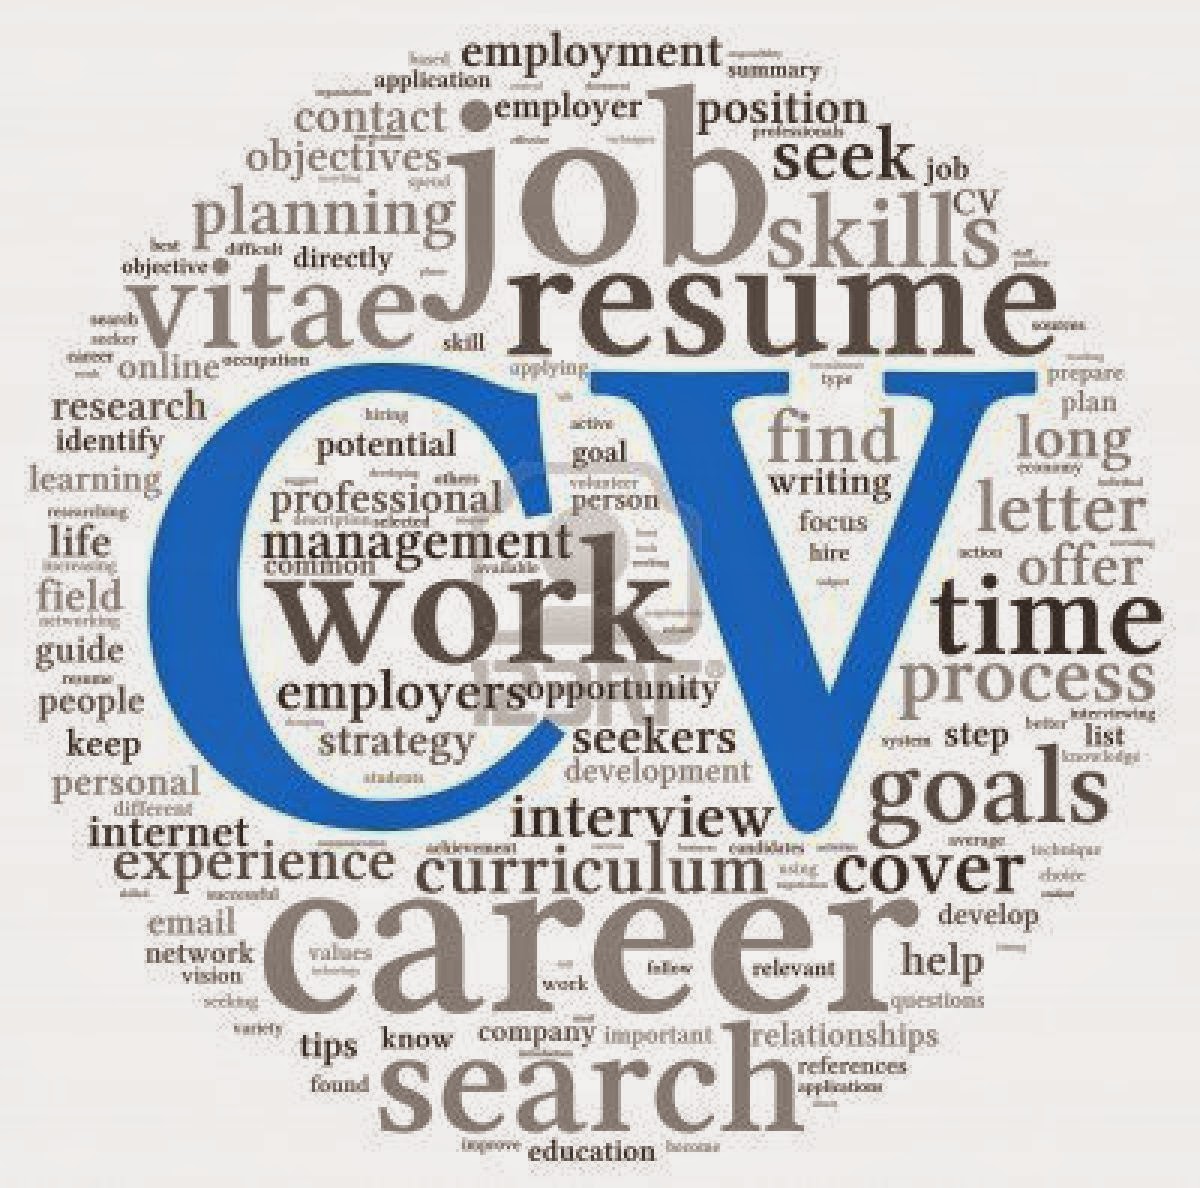 Step by step CV (Resume) writing: How to Write a CV or Resume